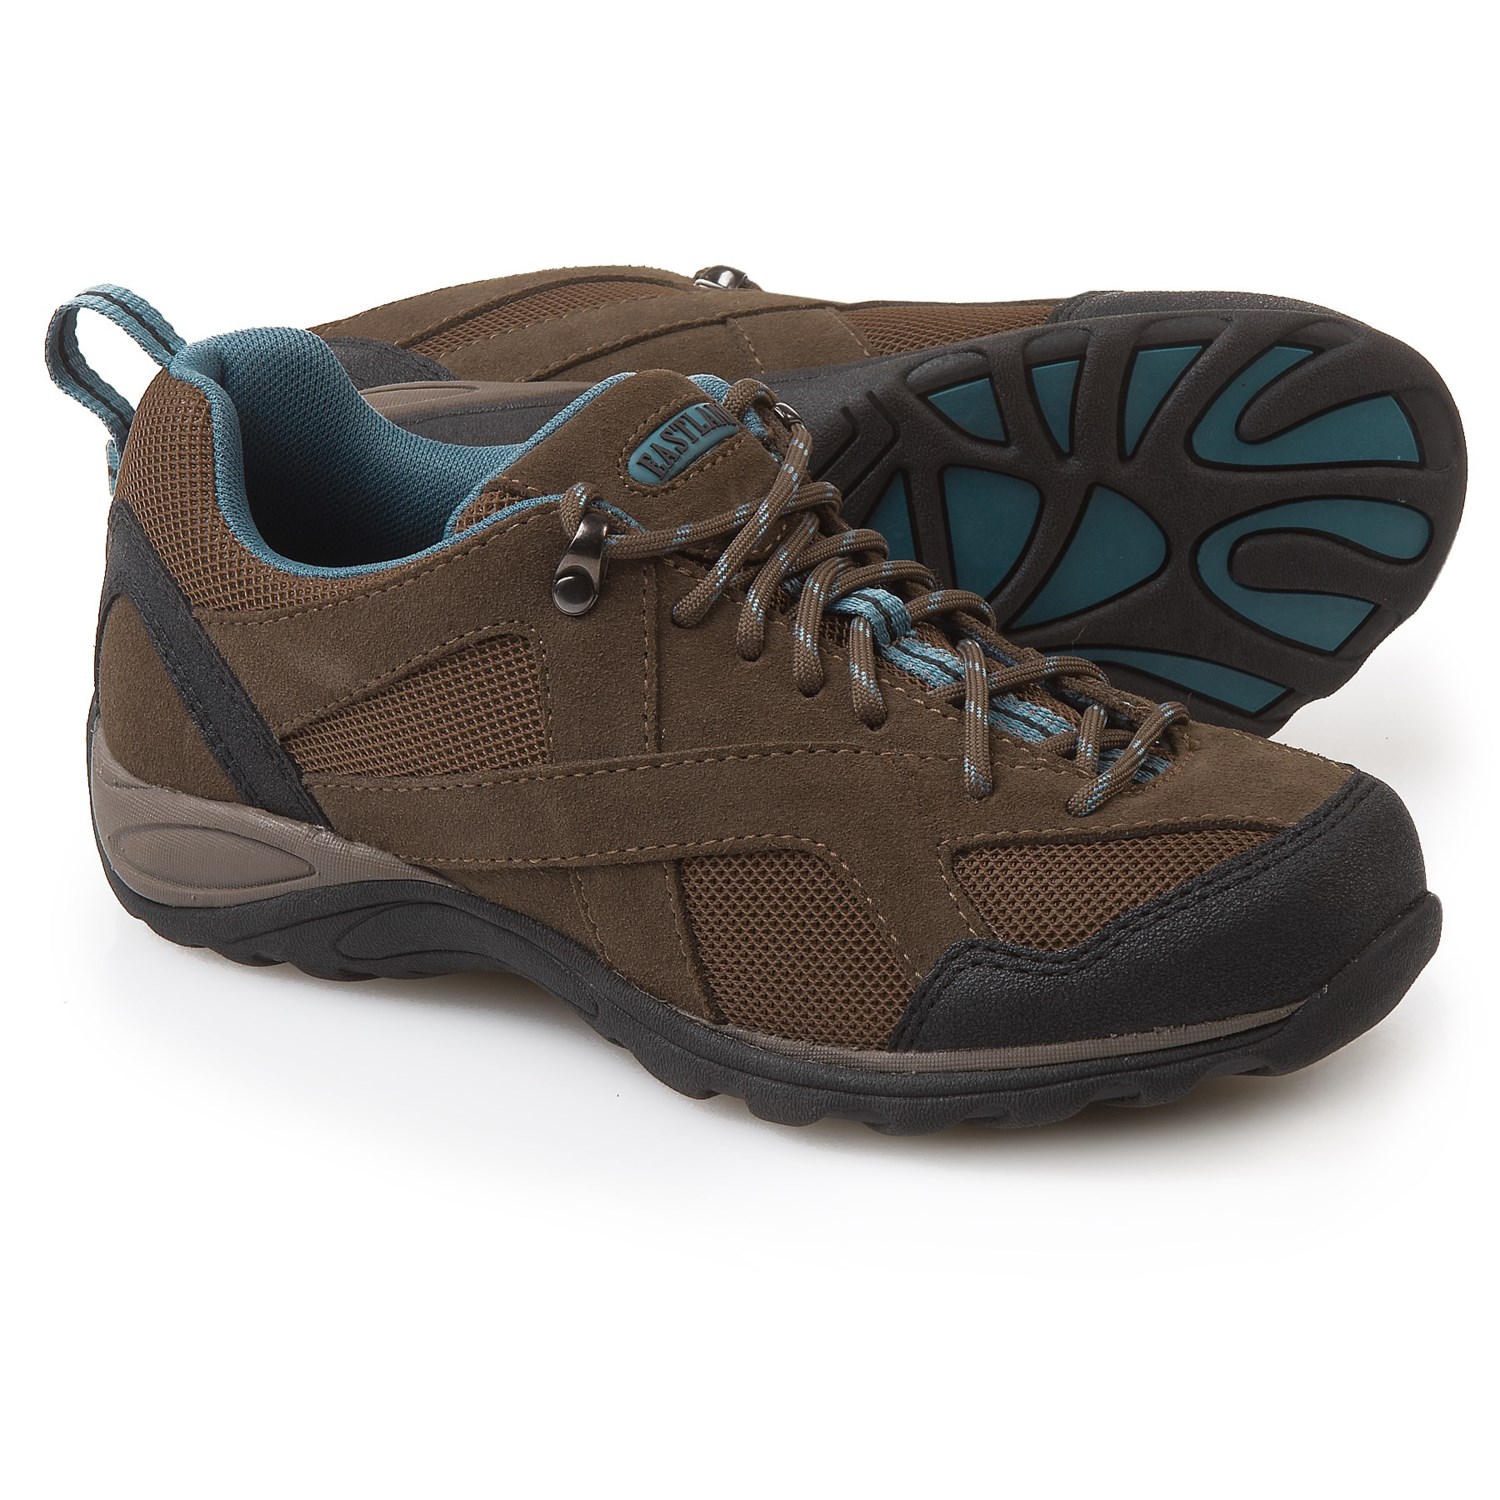 Eastland Odessa Hiking Shoes (For Women) - Save 55%